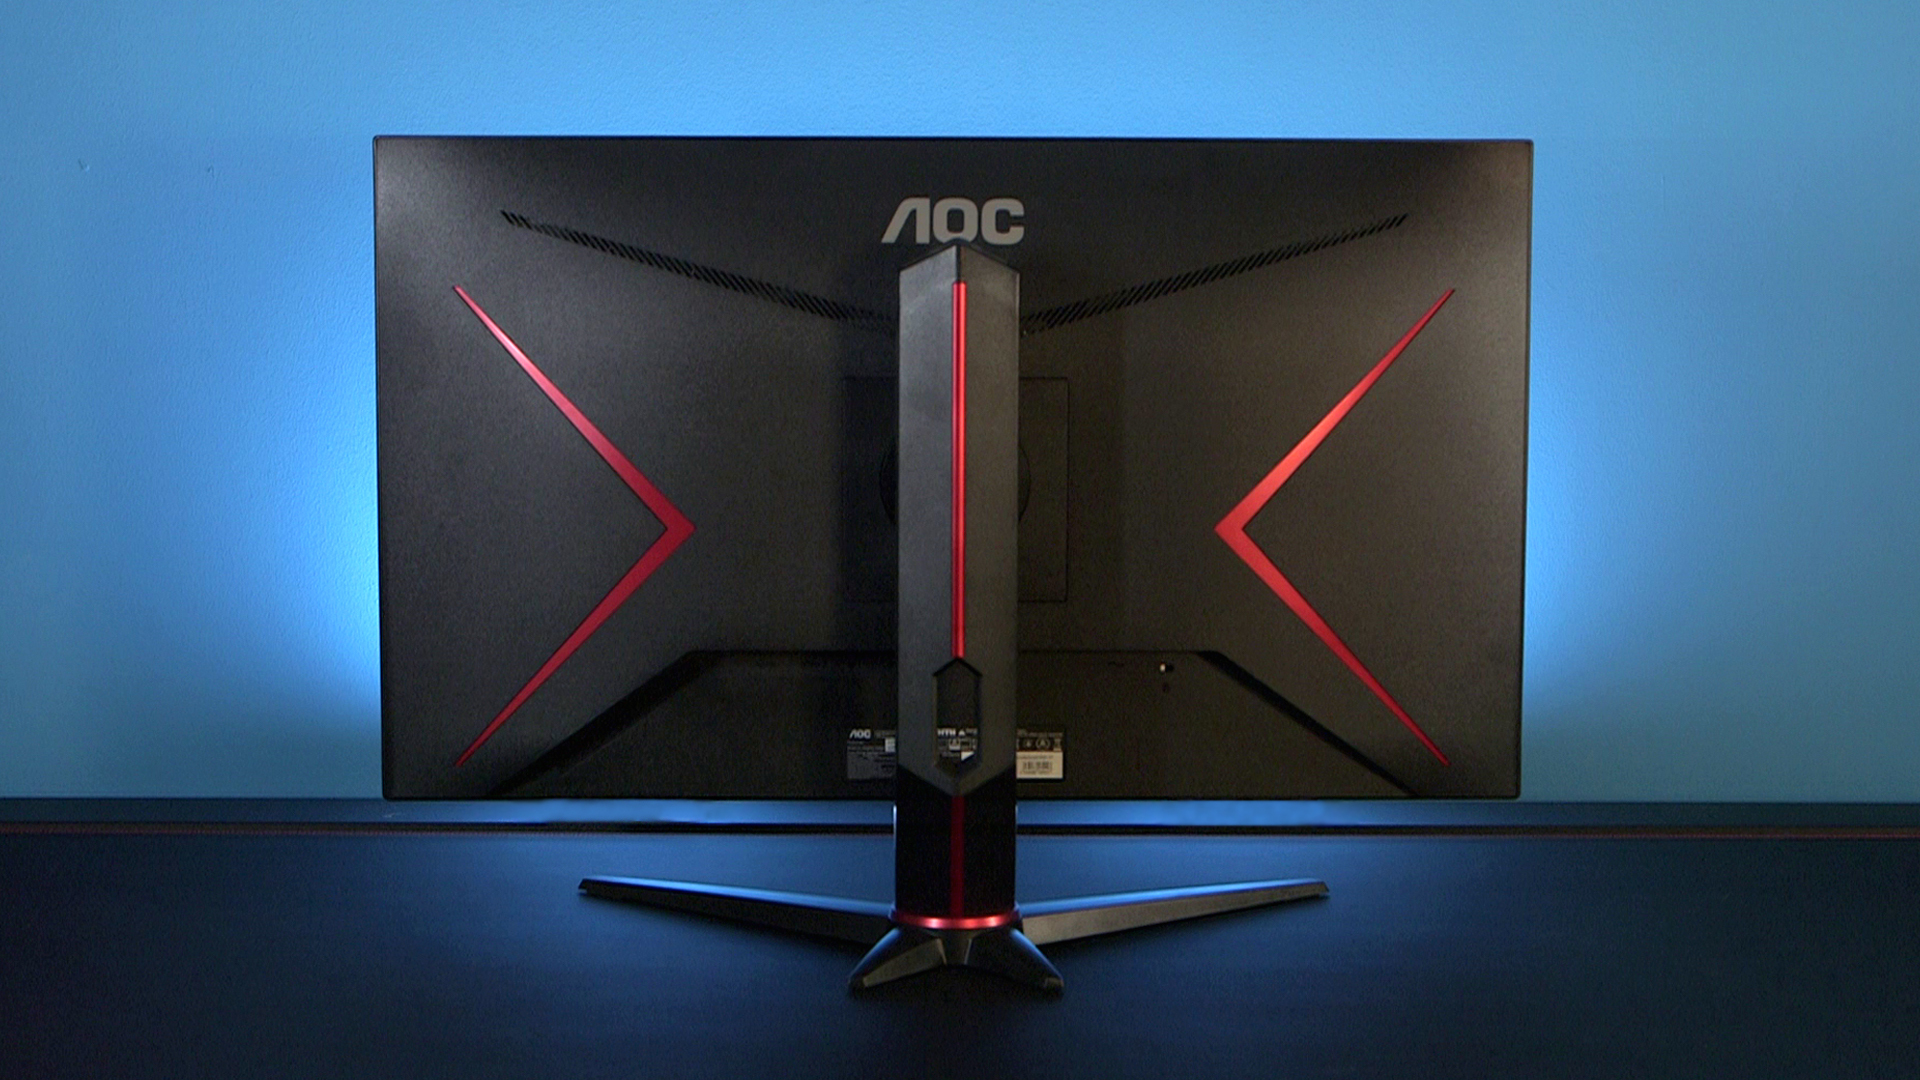 The AOC U28G2XU gaming monitor from the back.